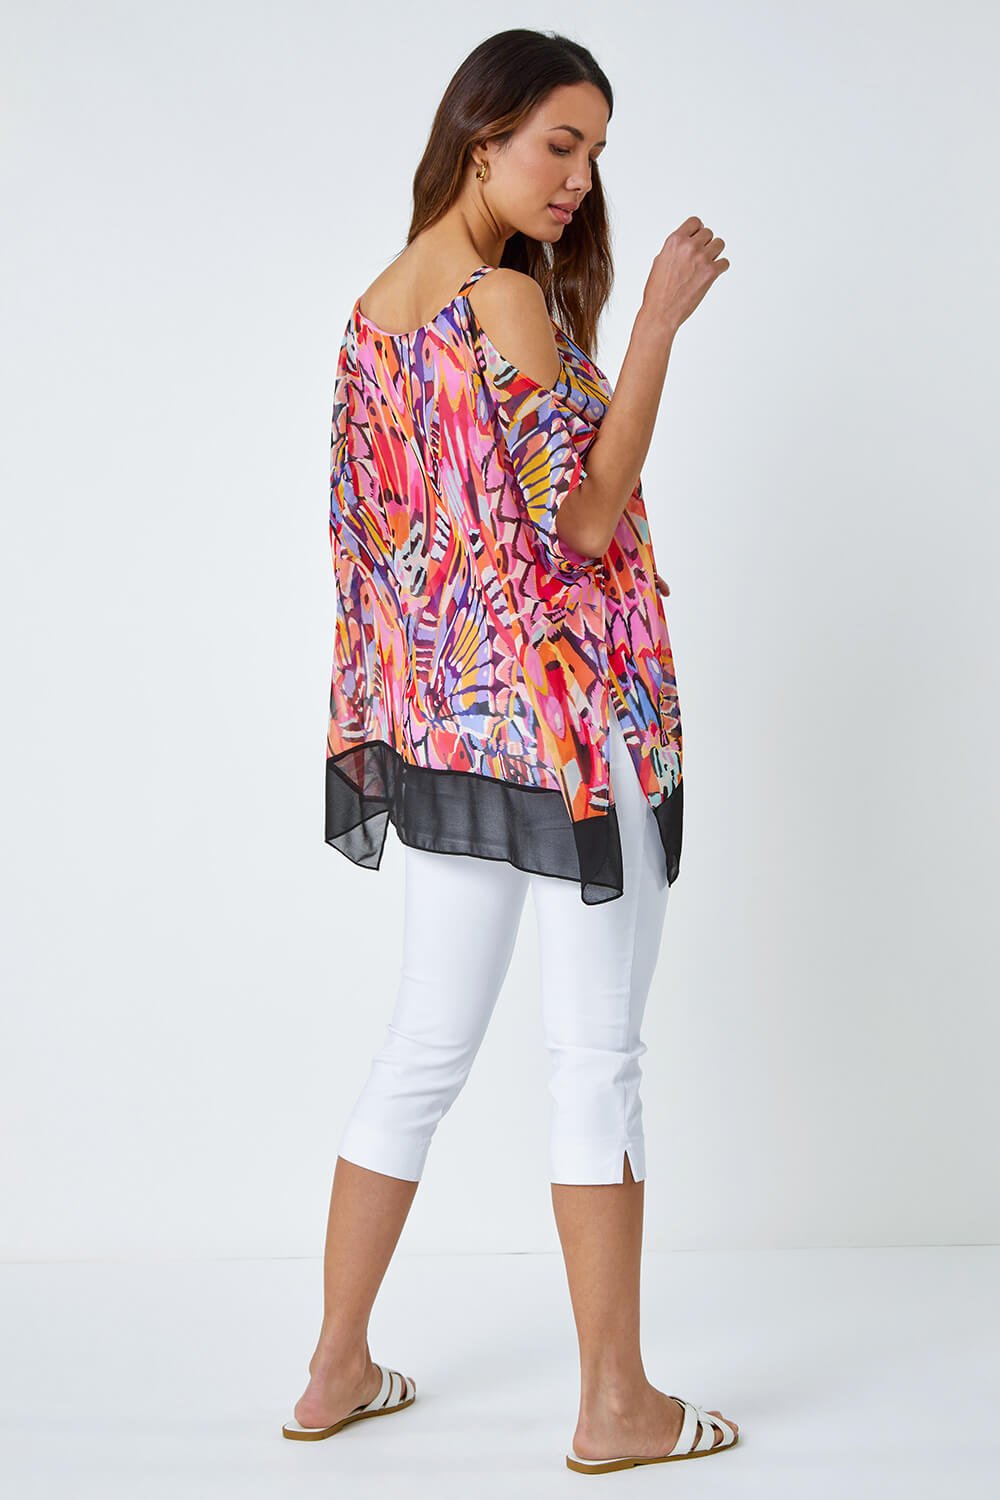 PINK Butterfly Contrast Cold Shoulder Top, Image 3 of 5